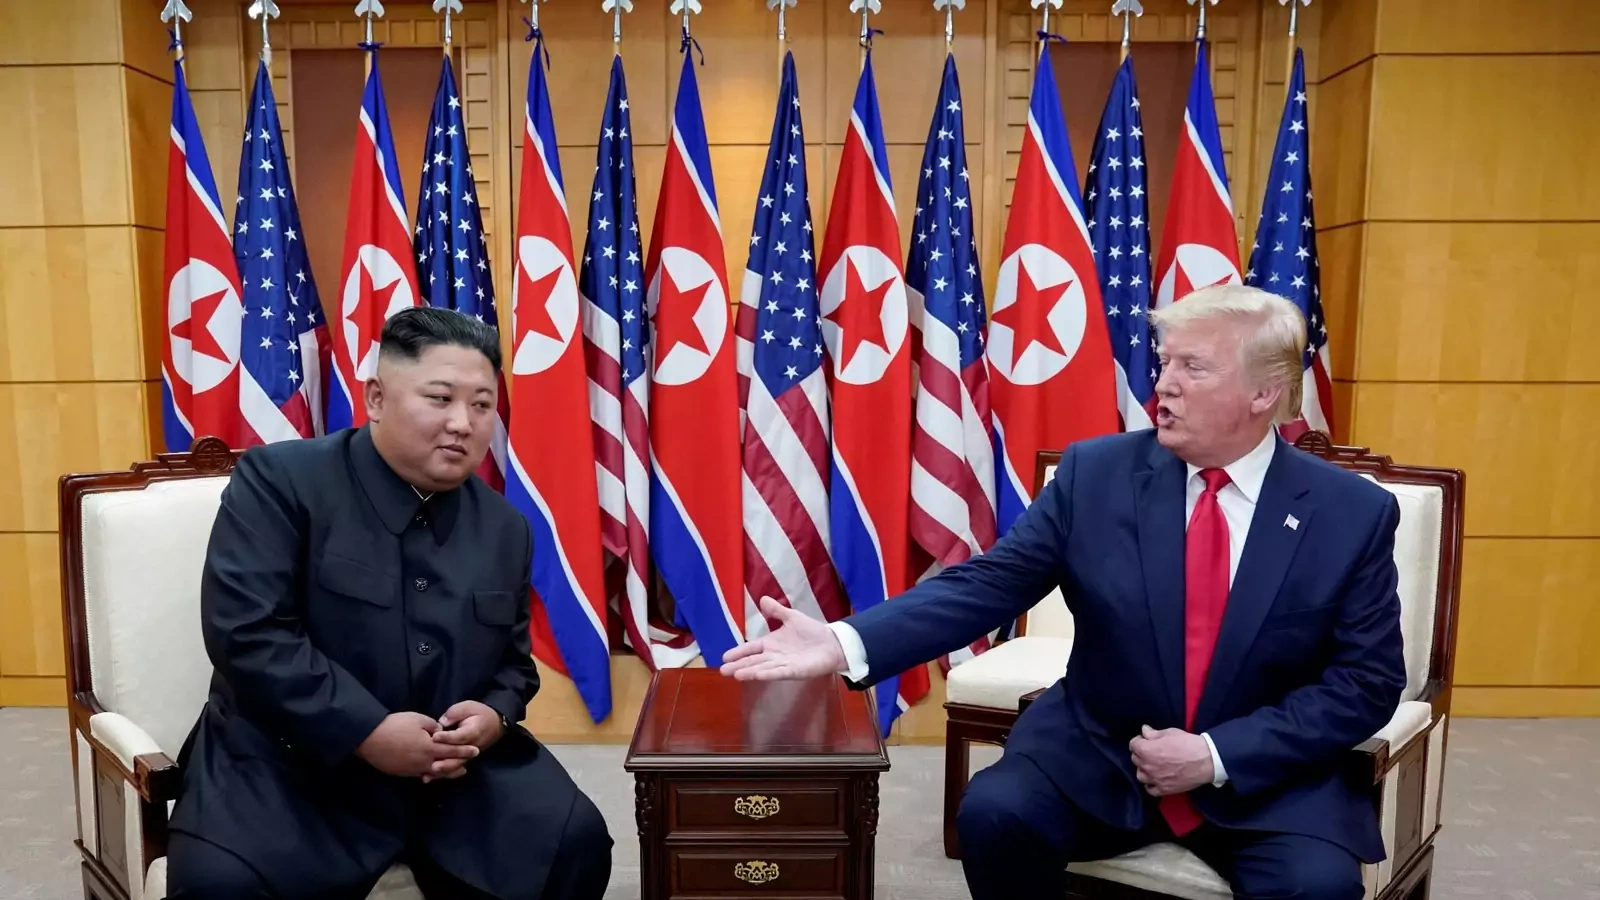 U.S. President Donald J. Trump meets with North Korean leader Kim Jong Un at the demilitarized zone separating the two Koreas, in Panmunjom, South Korea on June 30, 2019. 